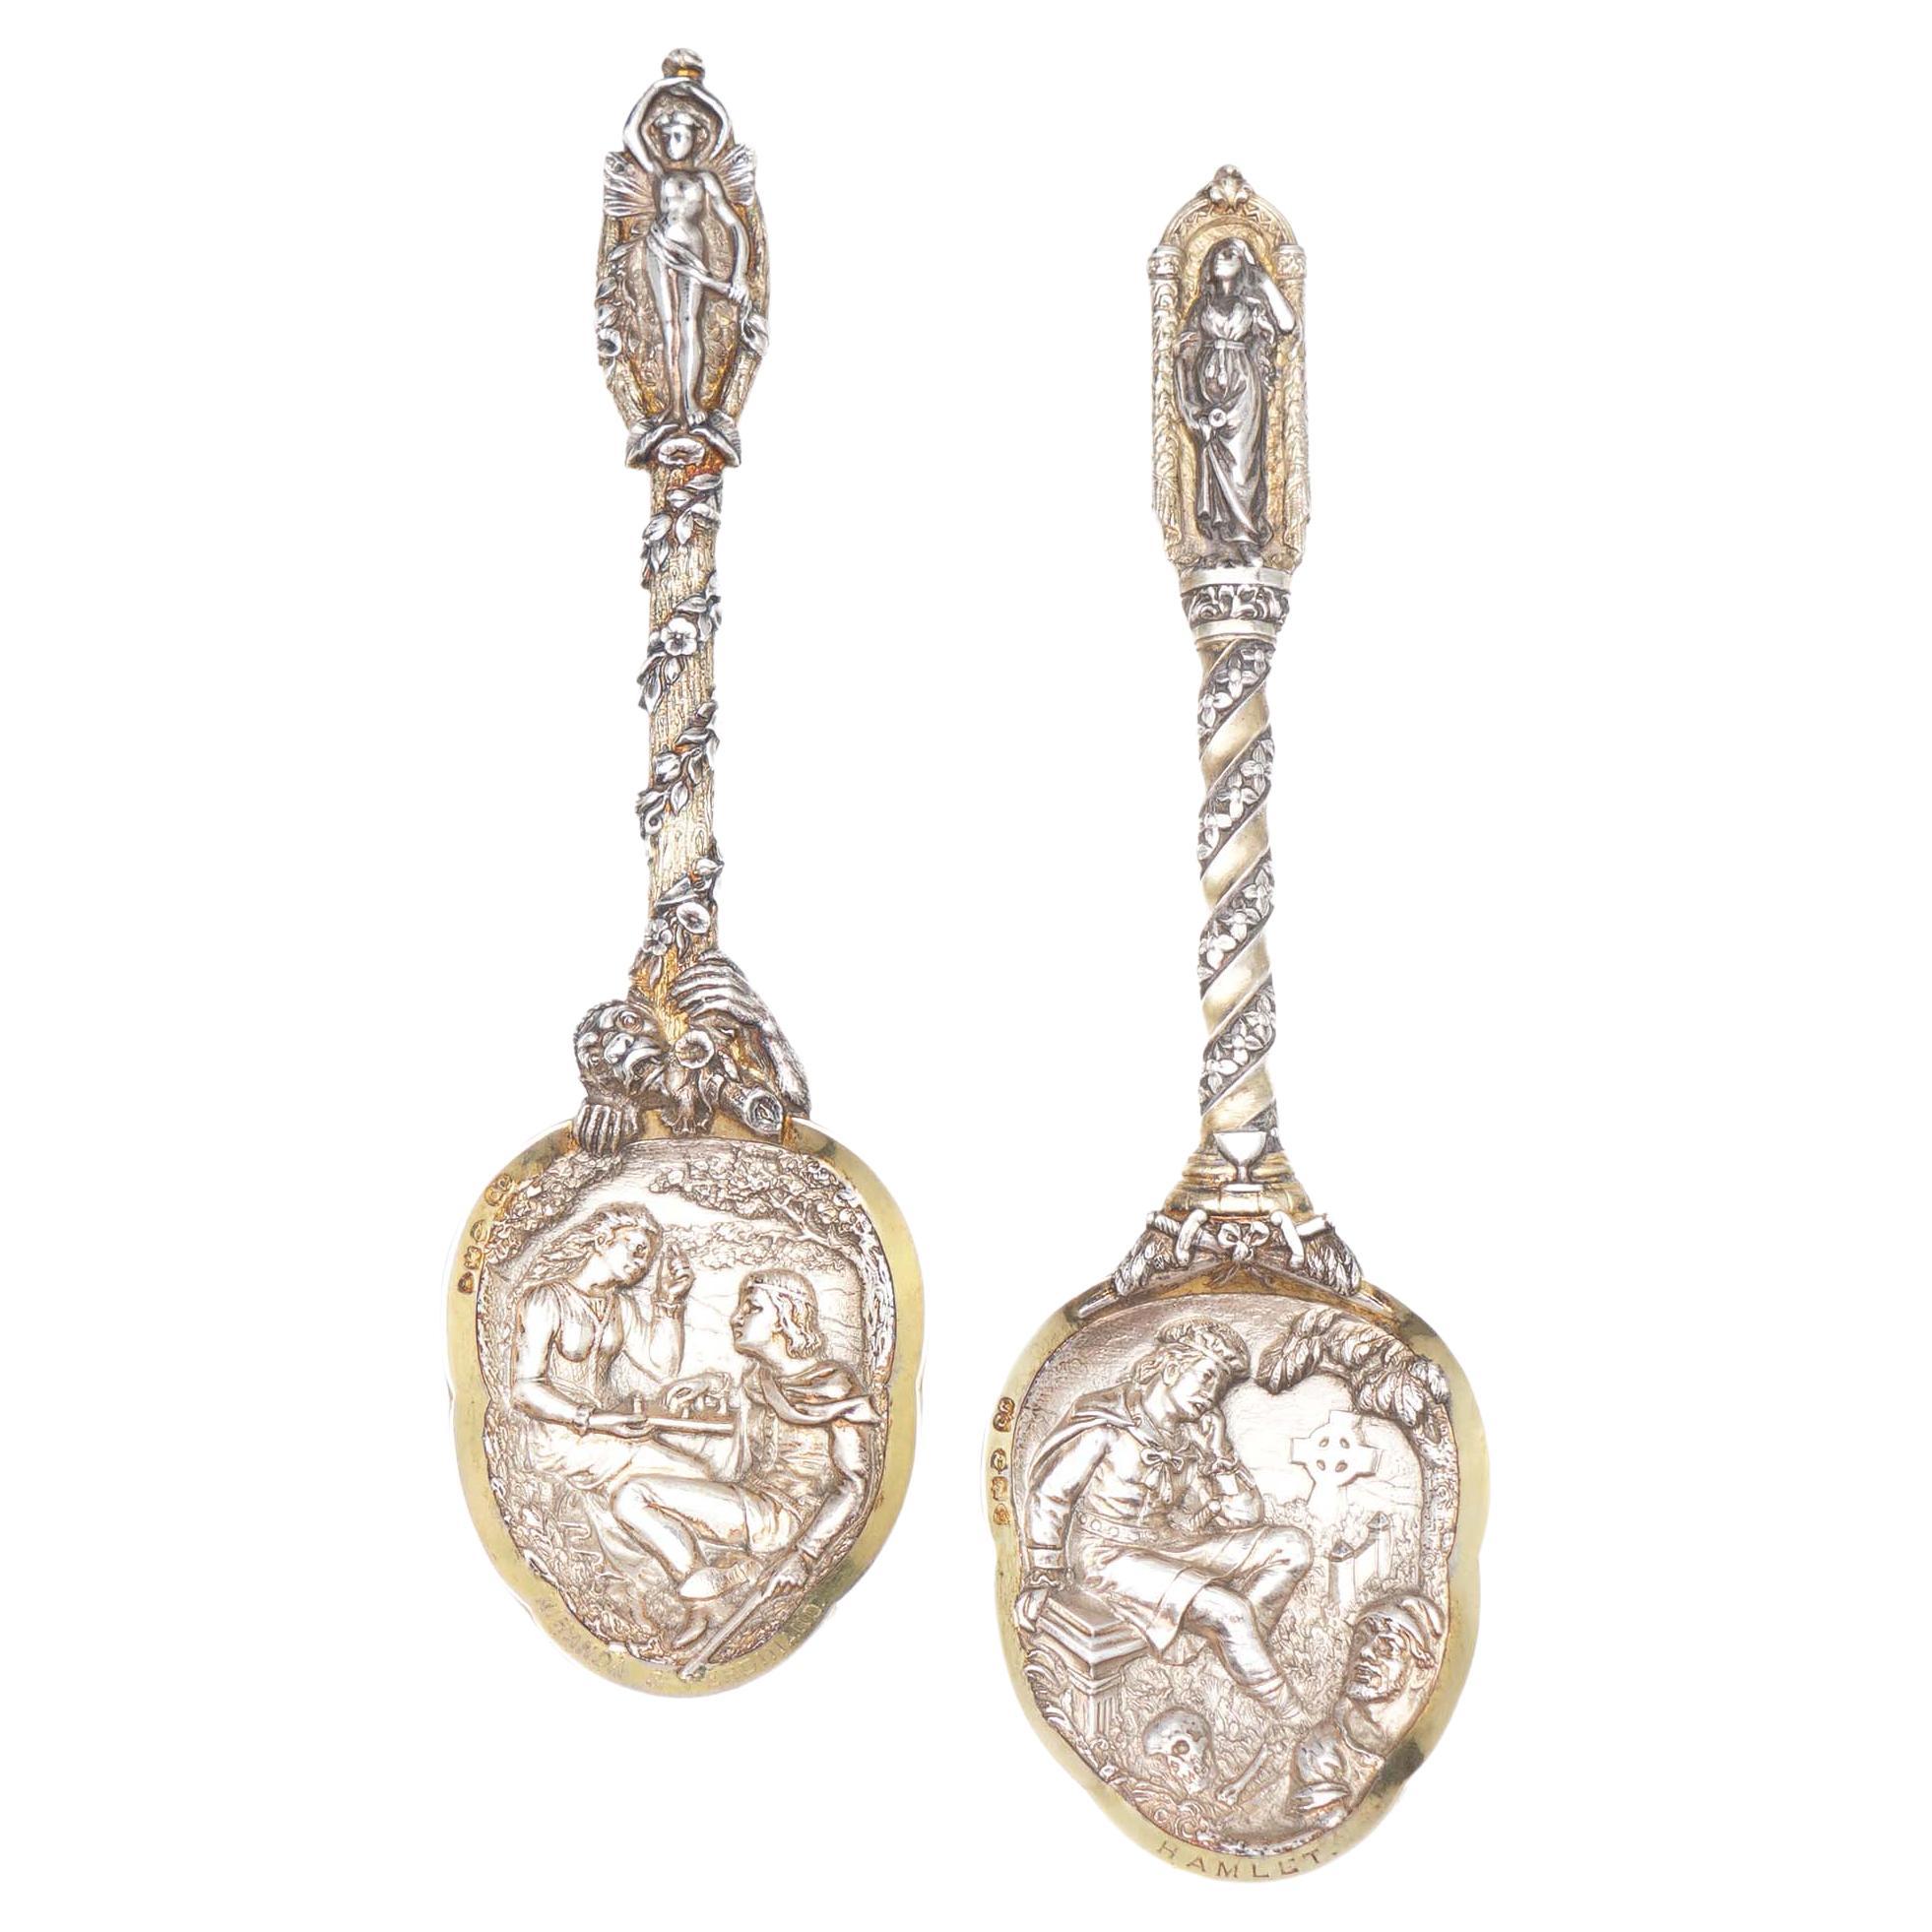 English Silver Pair of Spoons, London, 1891 by Charles Goodwin